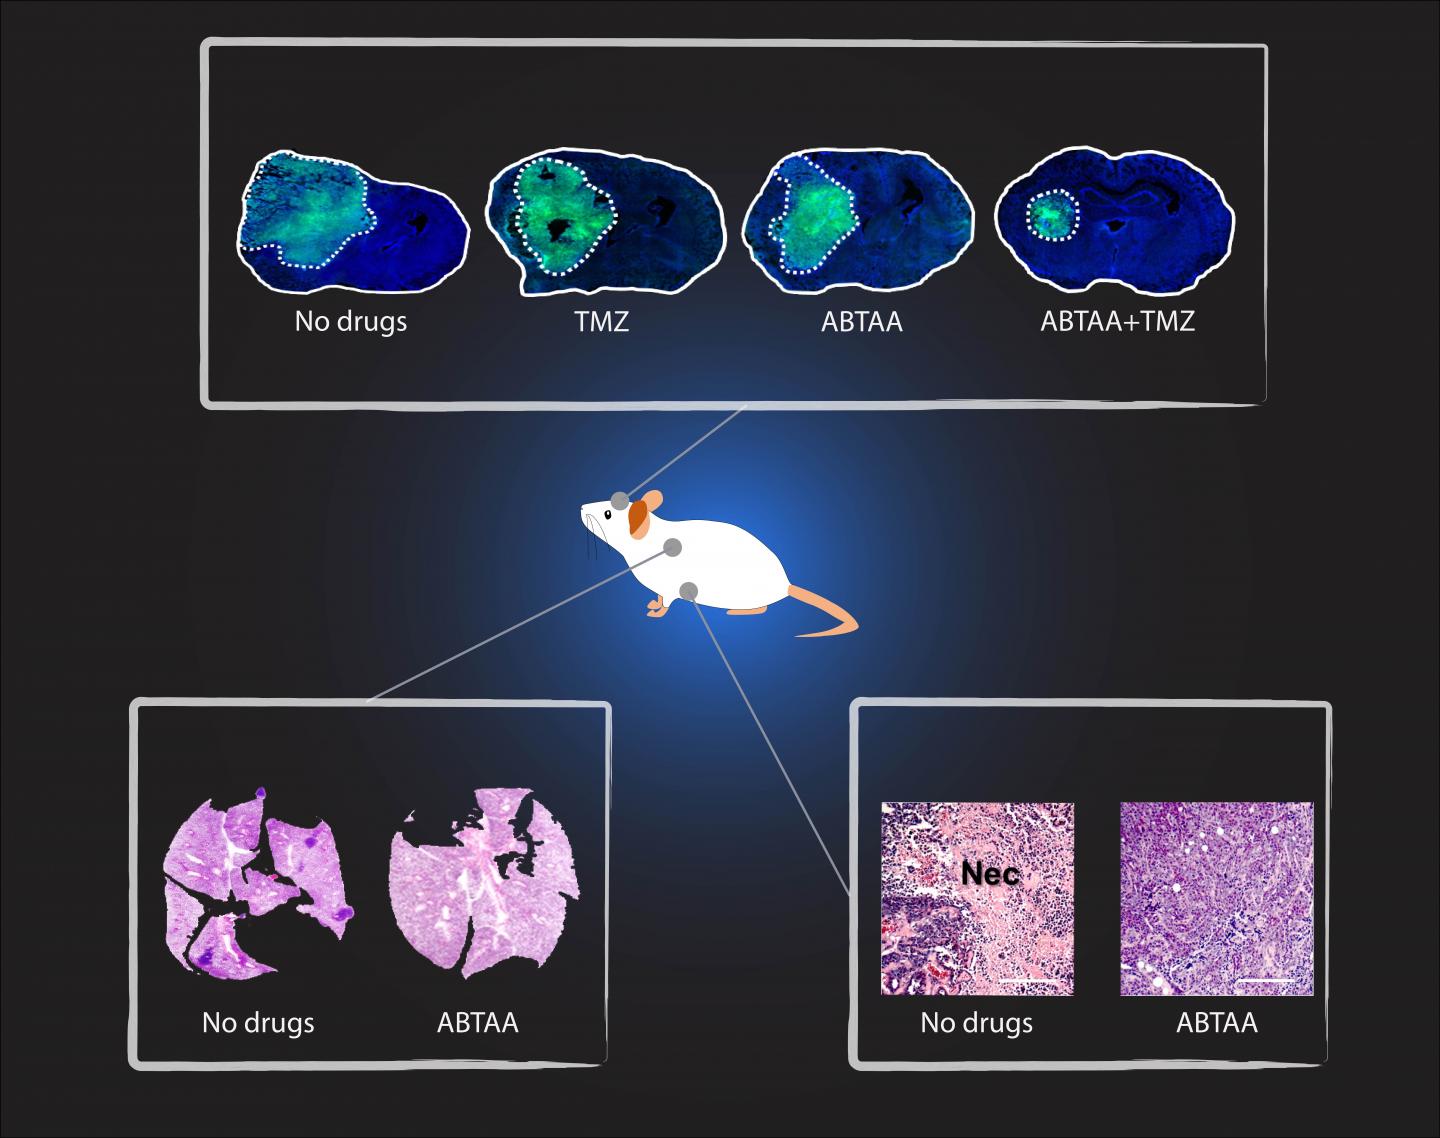 The antibody ABTAA alone and in combination with other anticancer drugs has a beneficial effect in reducing tumor volume. ABTAA was tested in mice with brain tumor (glioma) and lung or breast cancer. The image shows the improvements: reduction in glioma tumor size, reduction in metastatic colonies in lung tumor, and decrease in necrotic regions in breast tumor. [Institute for Basic Science ]